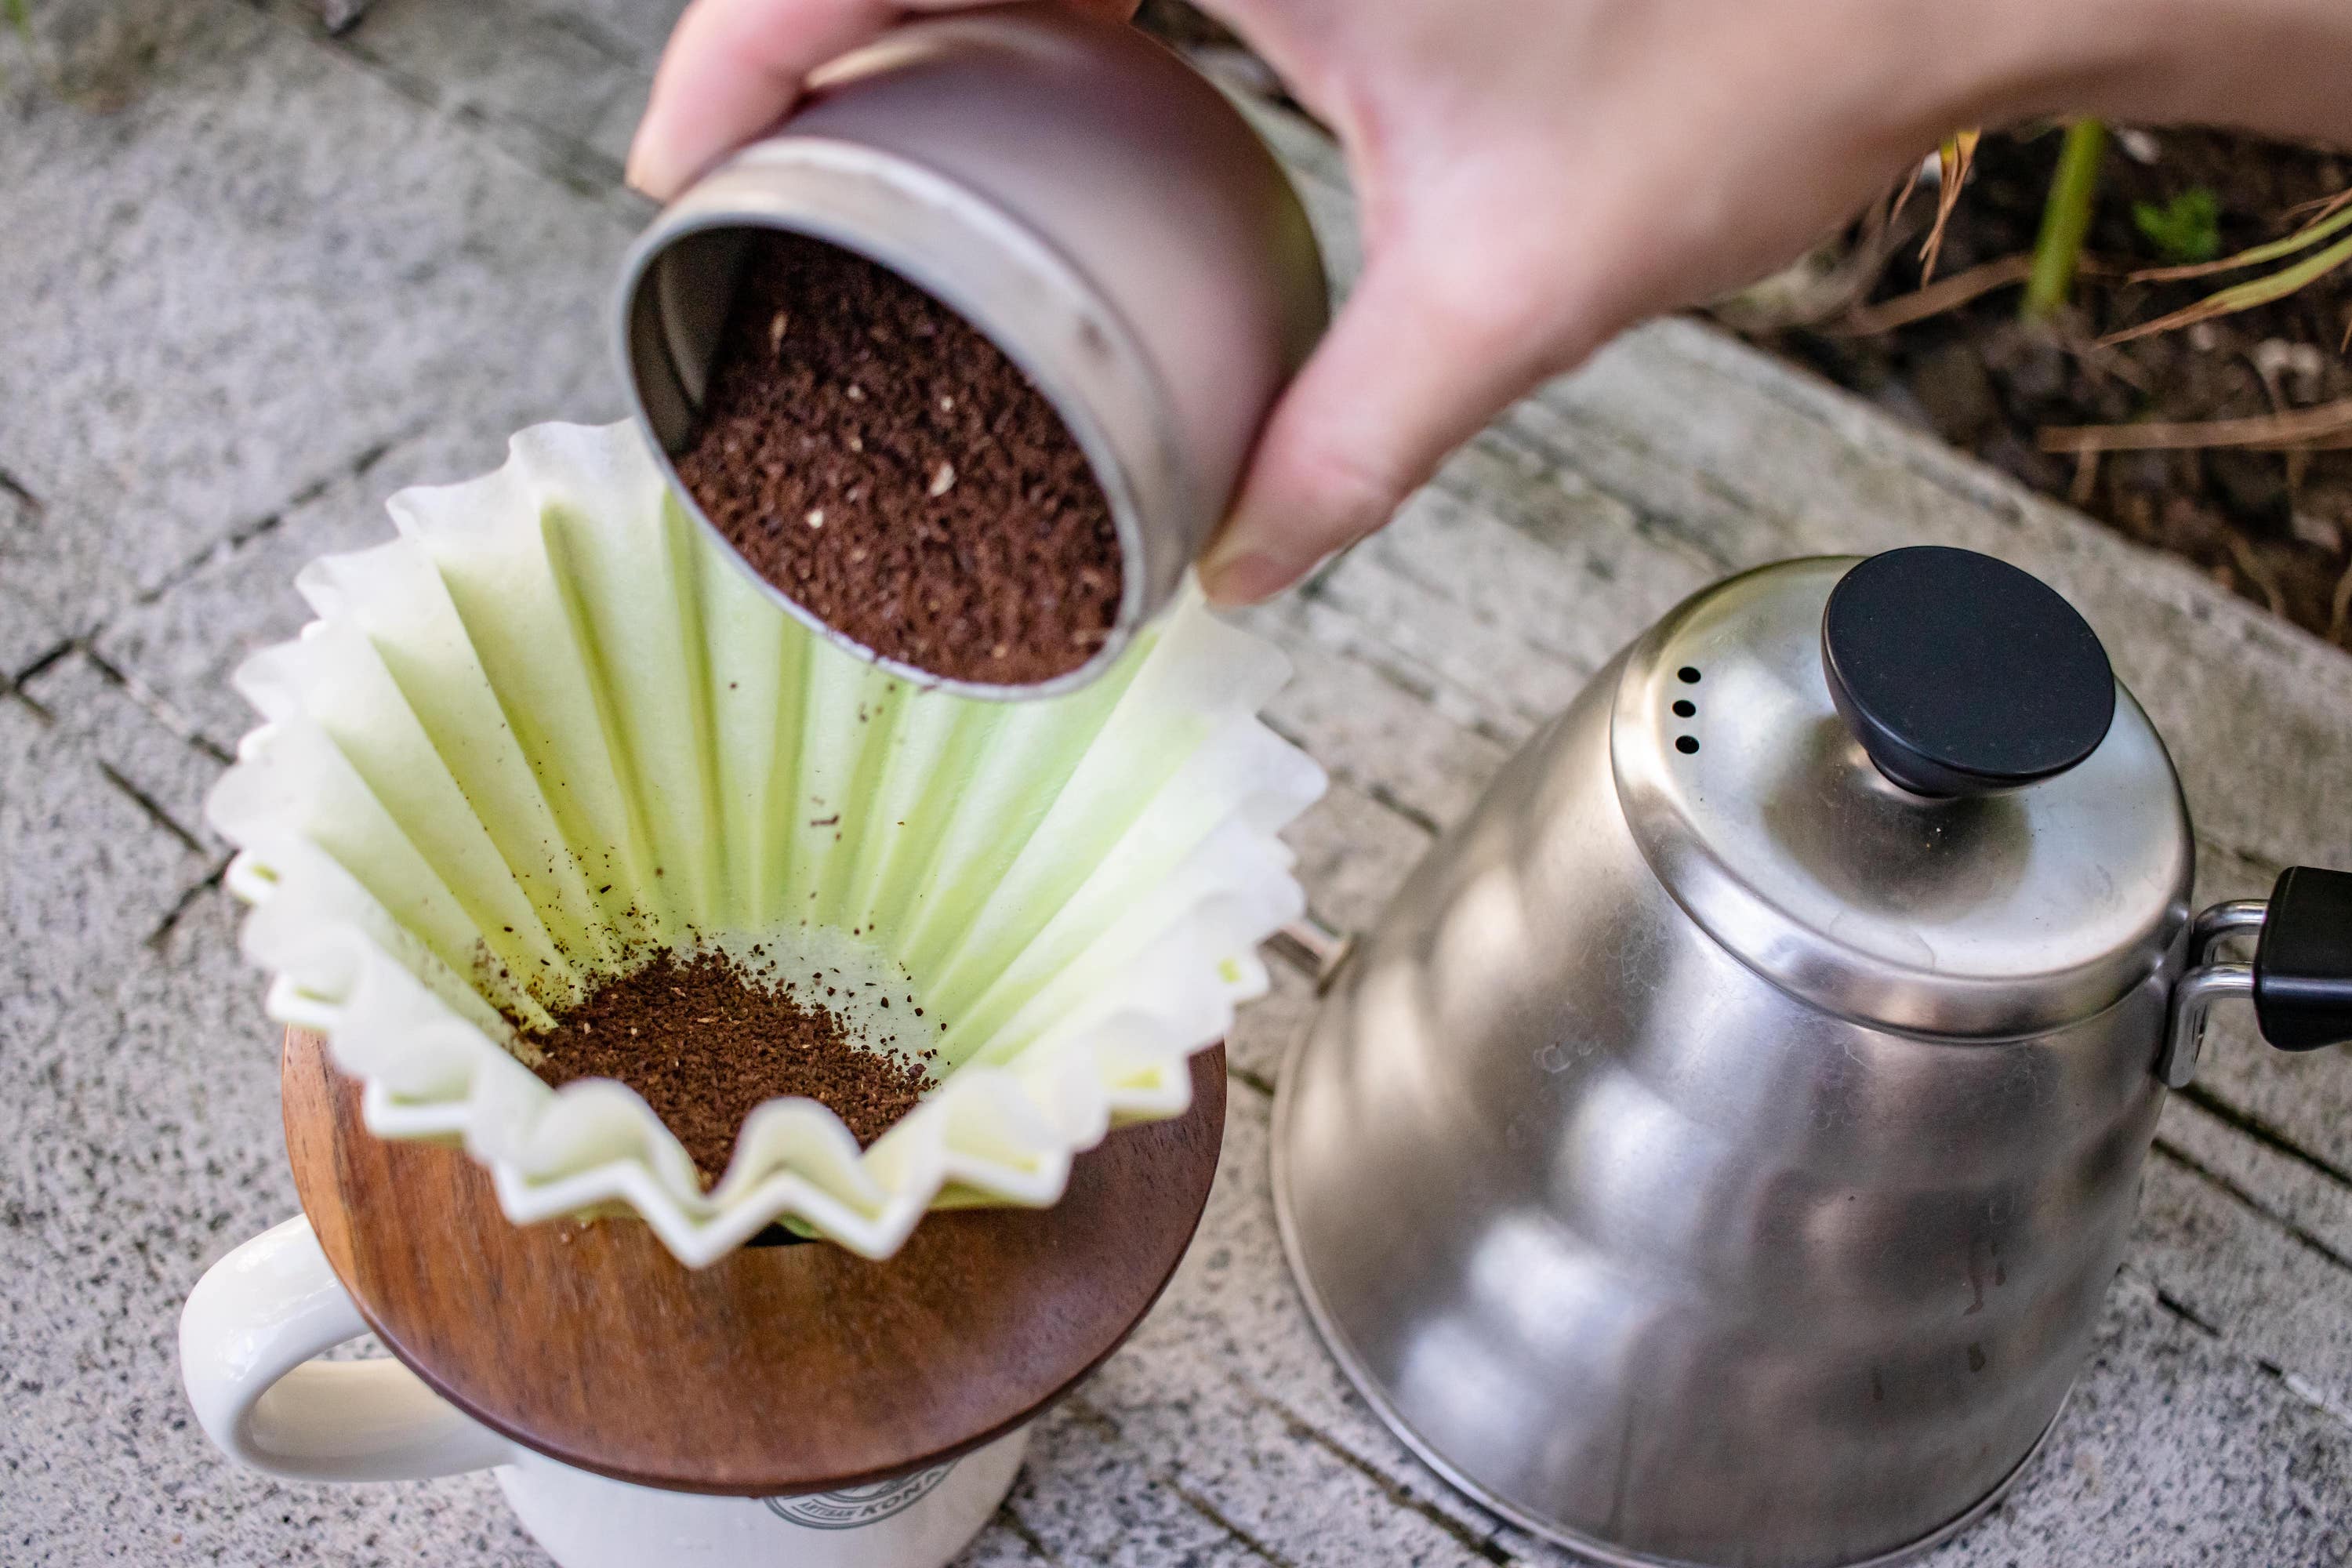 Pouring ground Kona coffee into the Origami Dripper brewer.